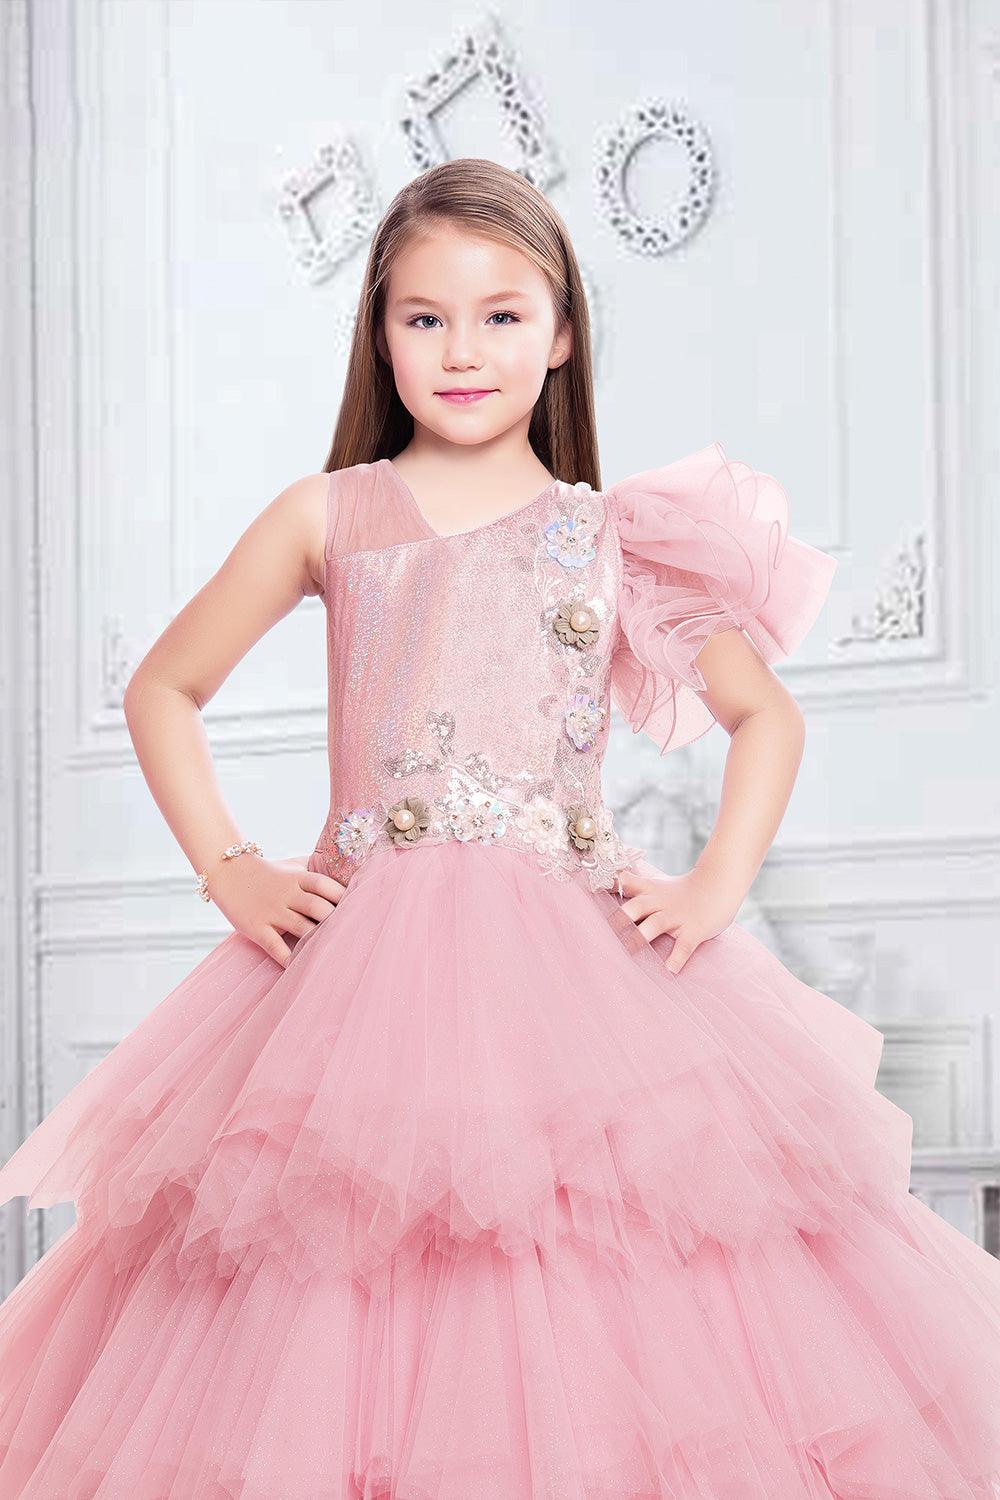 Baby Girl Clothes for 5 to 8 year olds for adorable and comfortable fashion  - The Economic Times